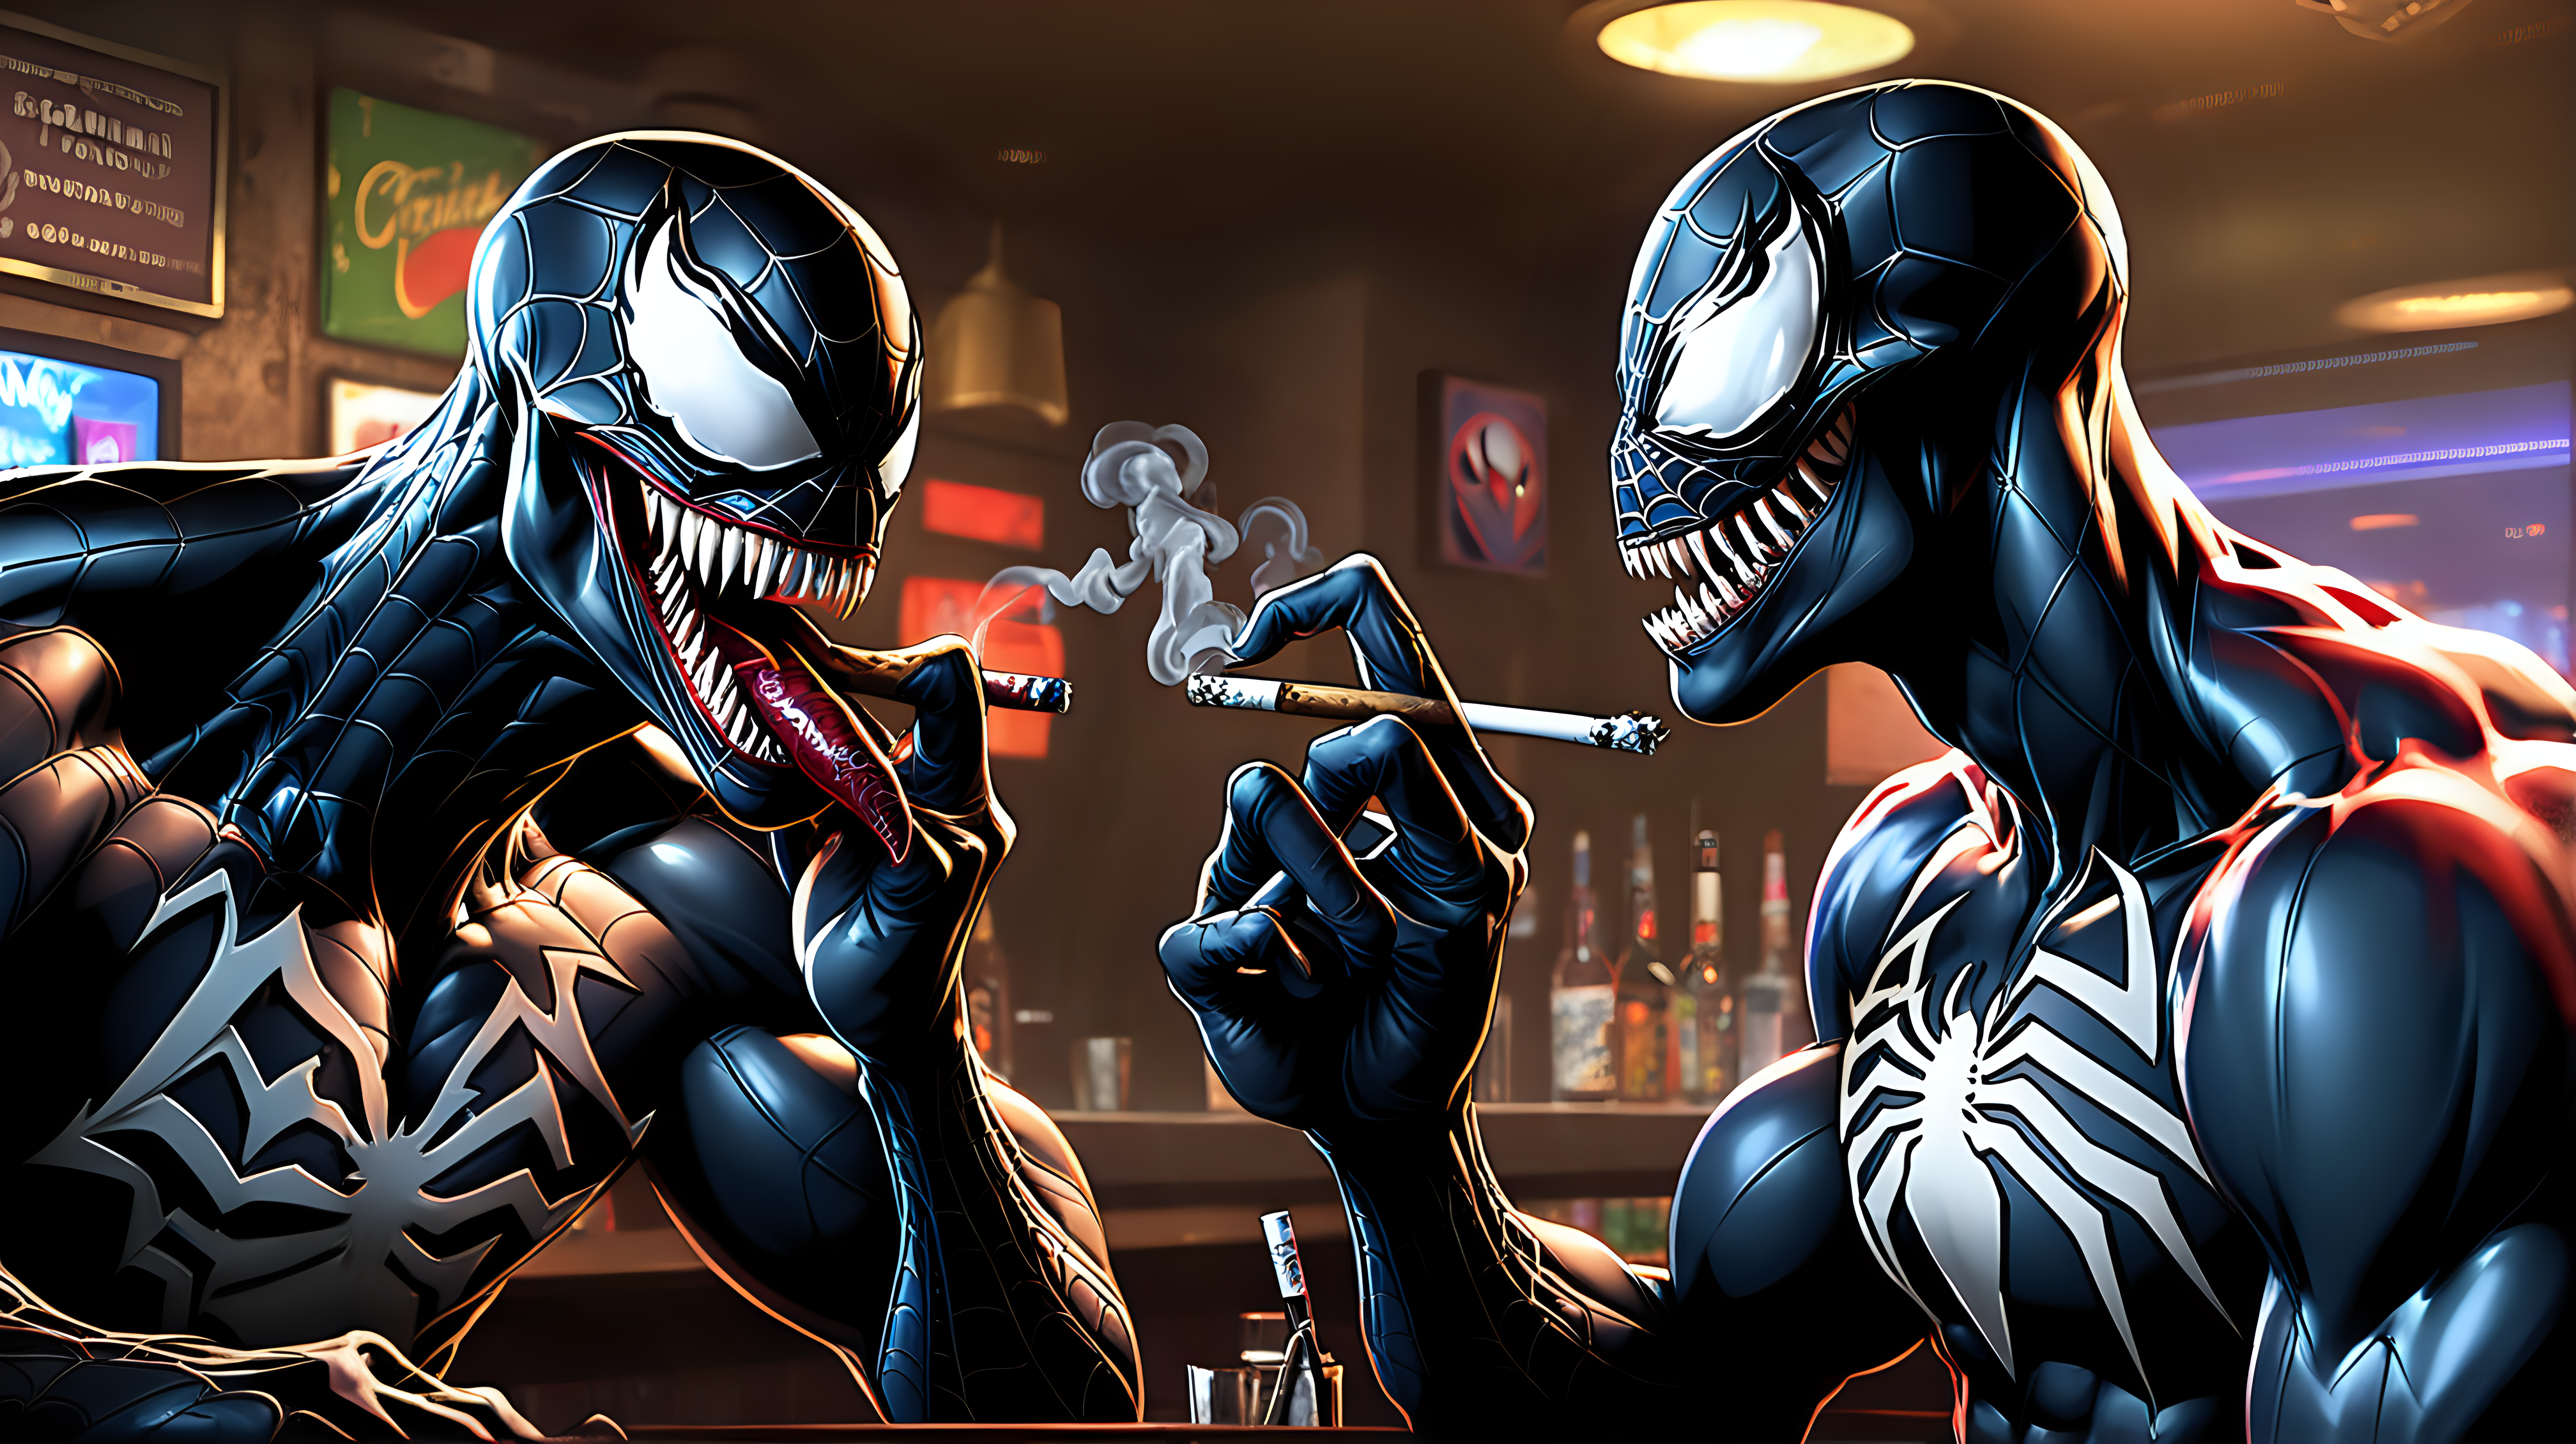 Venom smoking a joint at a bar with Spiderman